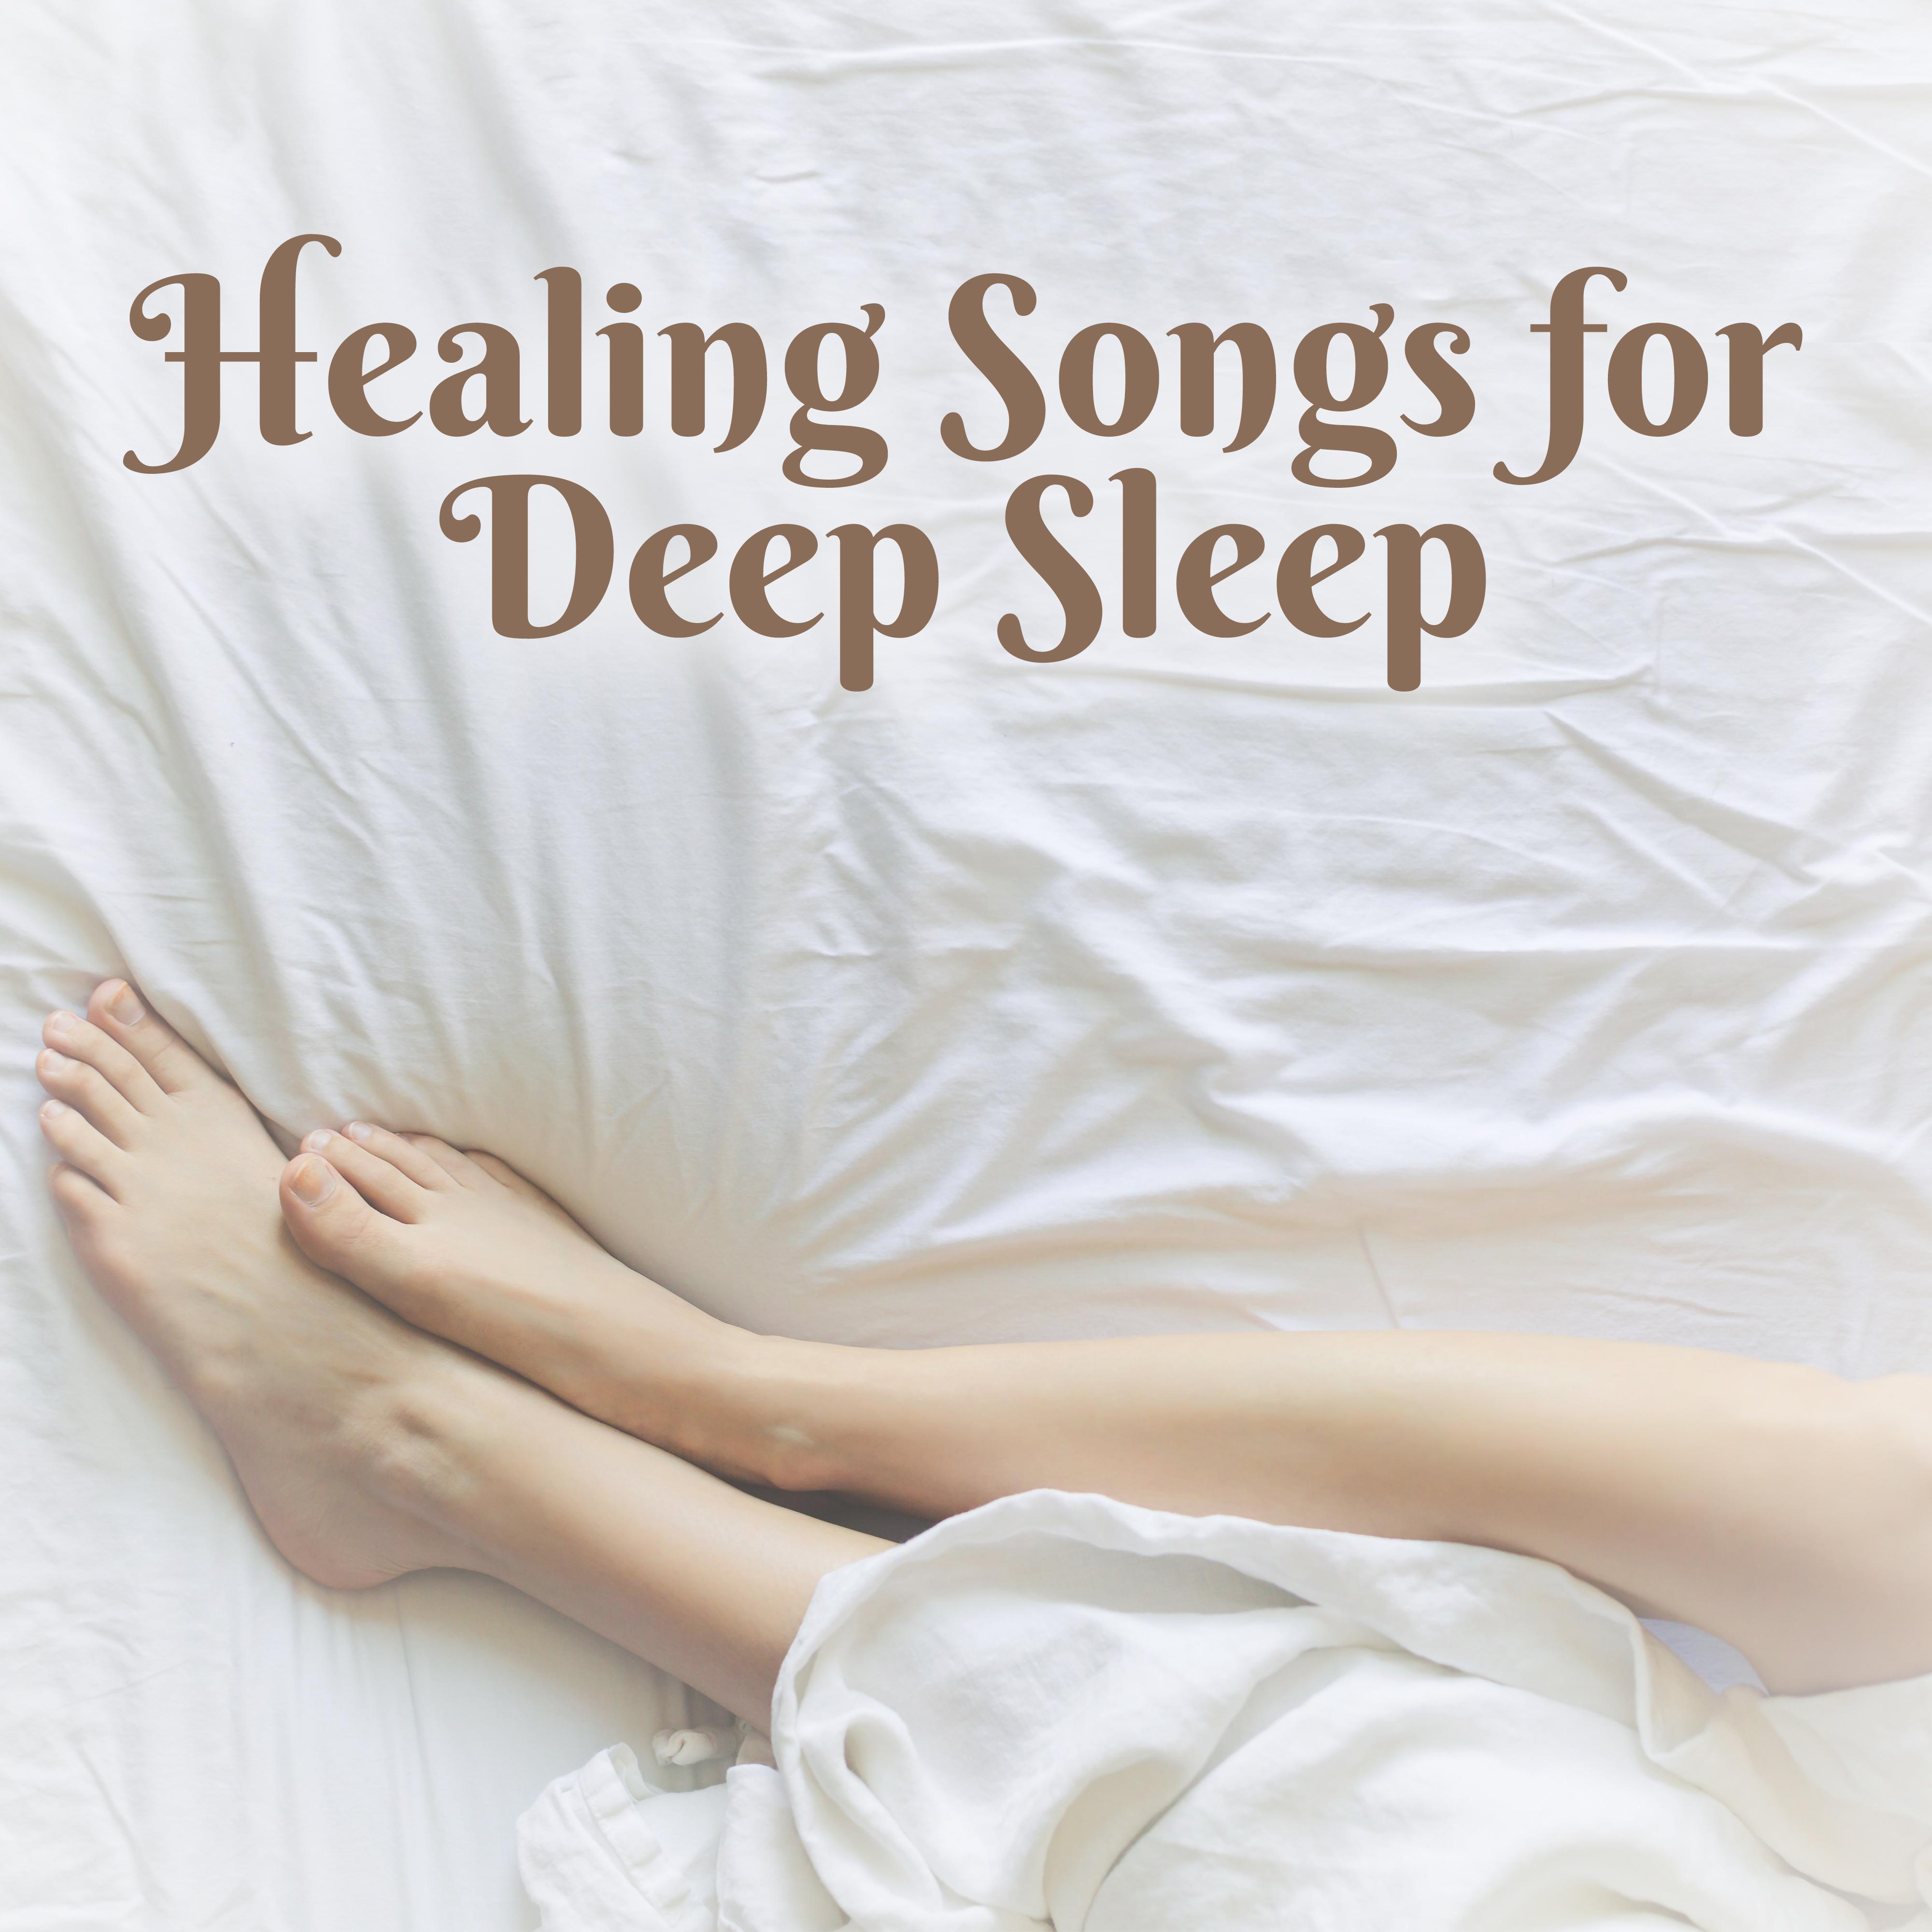 Healing Songs for Deep Sleep  Soft Sounds to Dreaming, Sweet Night Music, Peaceful Dreams, Relaxing Melodies